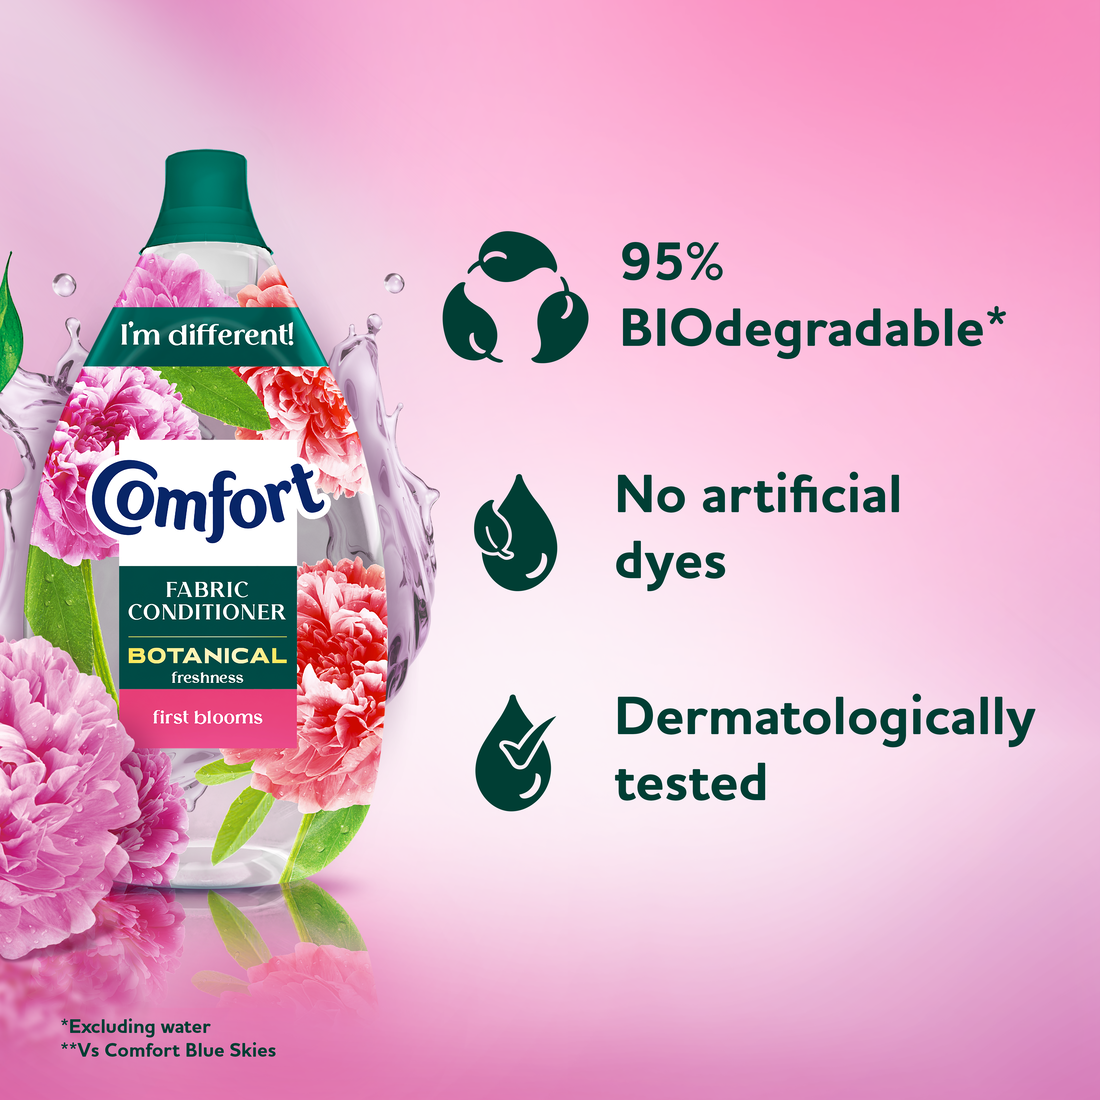 95% bio-degradable*
No artificial dyes
Dermatologically tested